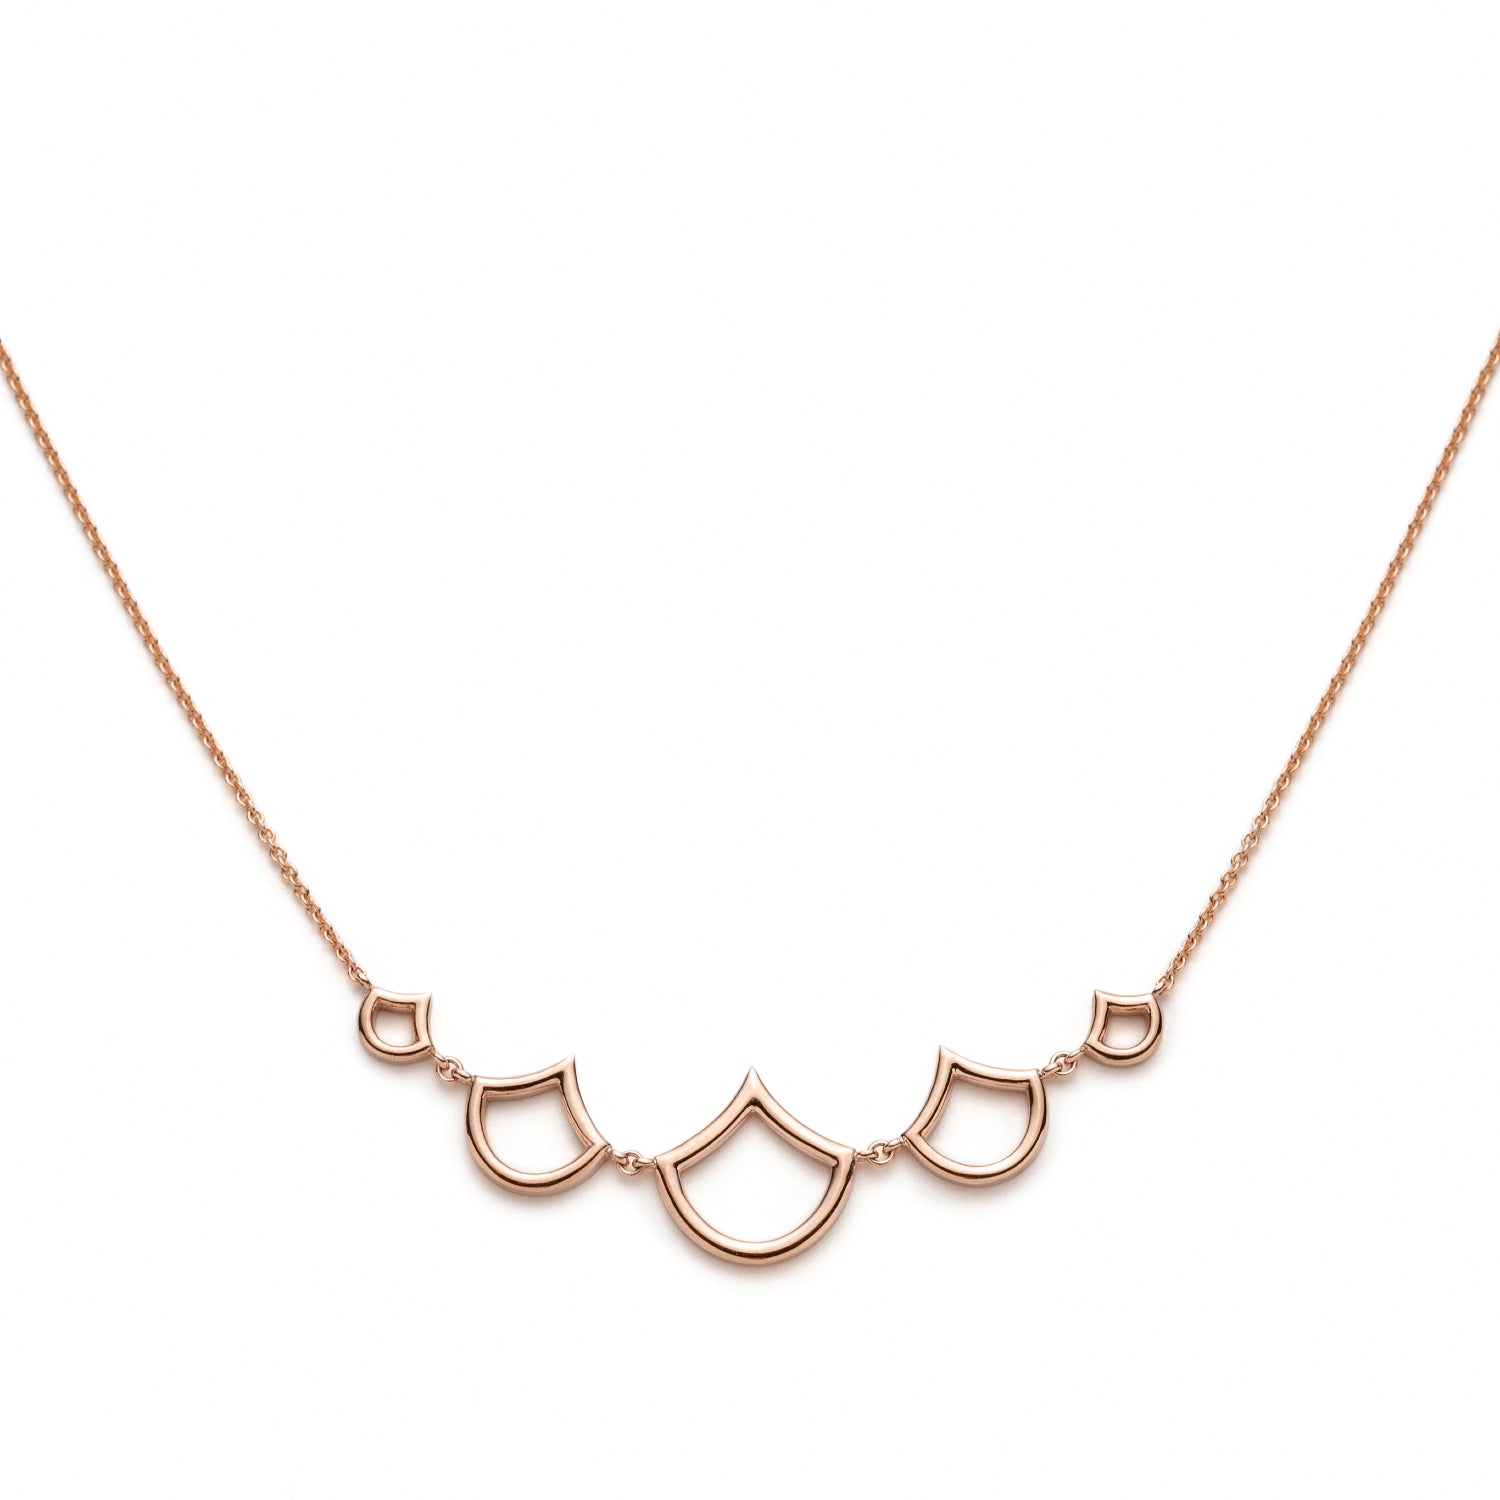 Five Lepi Mermaid Scale Motif Necklace in Rose Gold